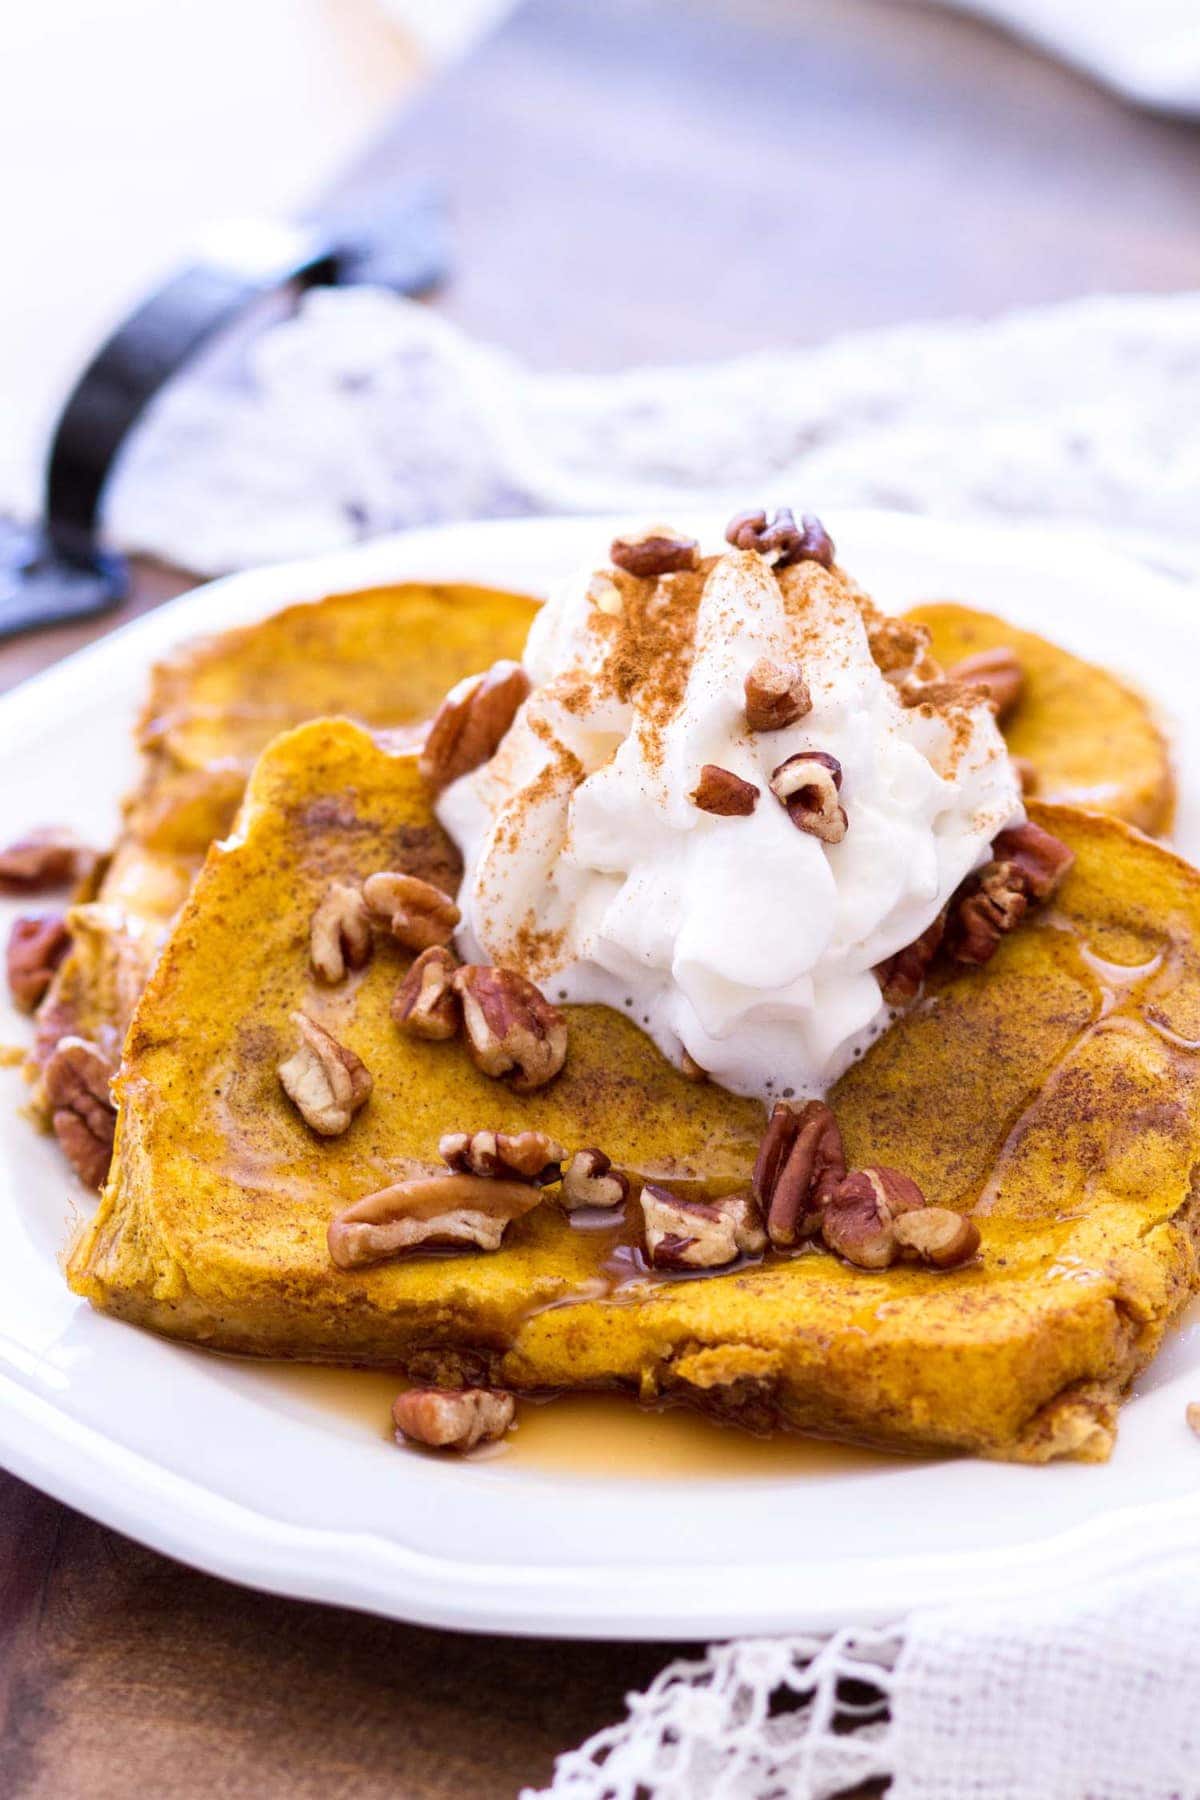 This easy pumpkin french toast recipe is baked in the oven, making this the perfect fall breakfast for any day of the week! Thick-cut bread is soaked in a rich pumpkin custard and baked to perfection! 